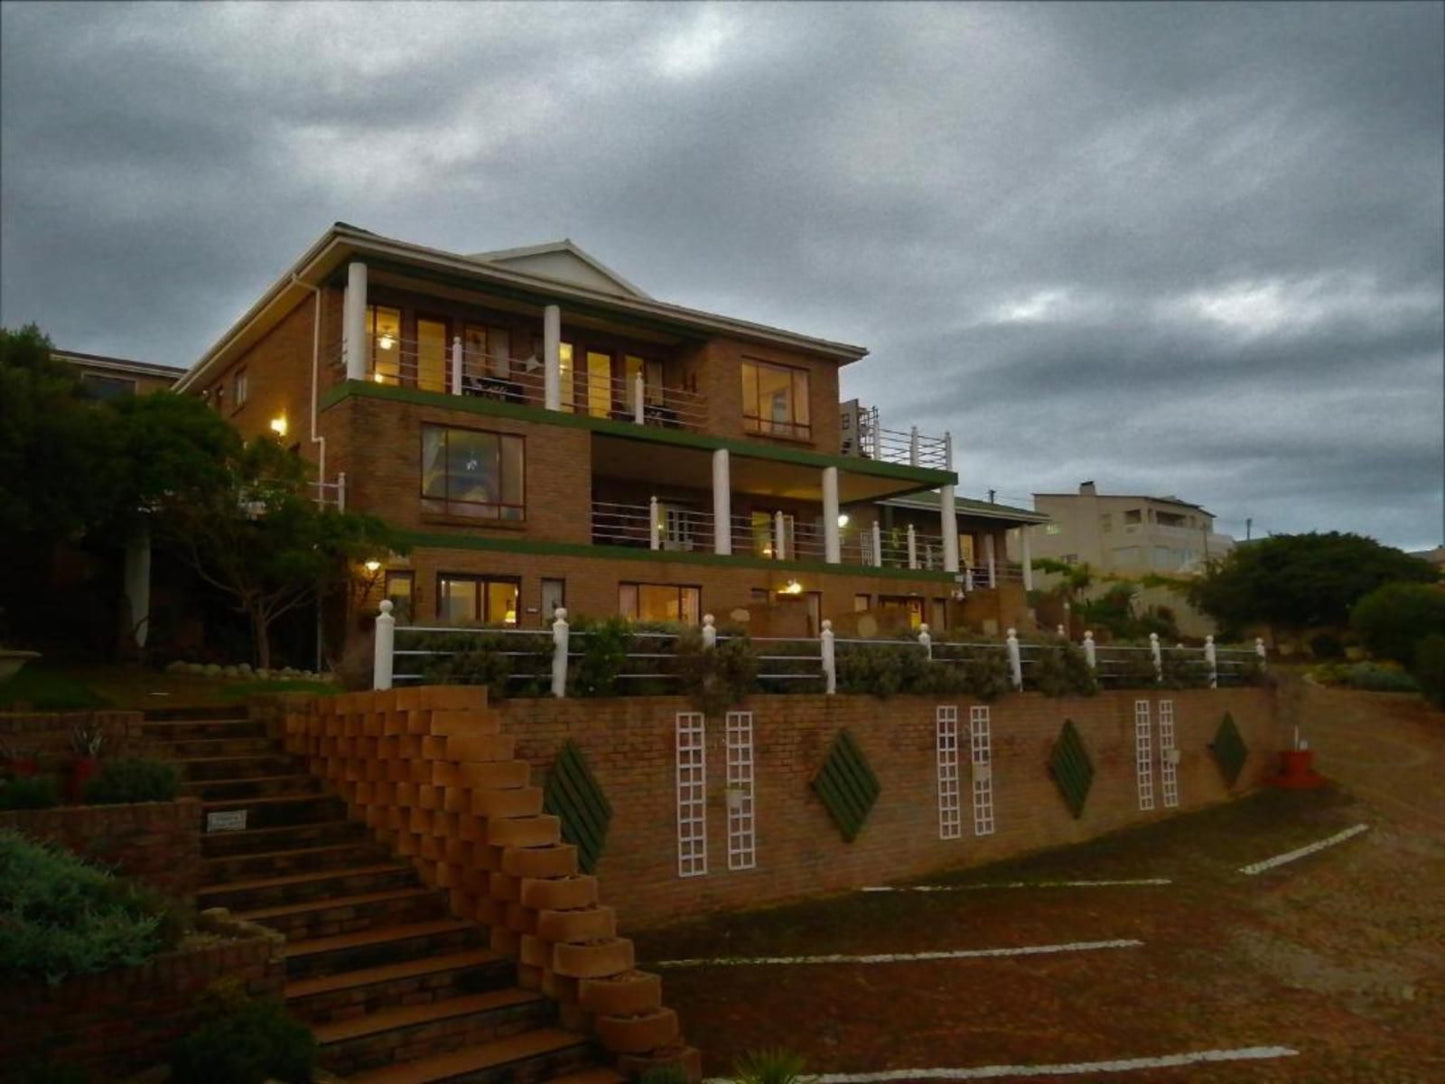 Amzee Bokmakierie Guest House Dana Bay Mossel Bay Western Cape South Africa House, Building, Architecture